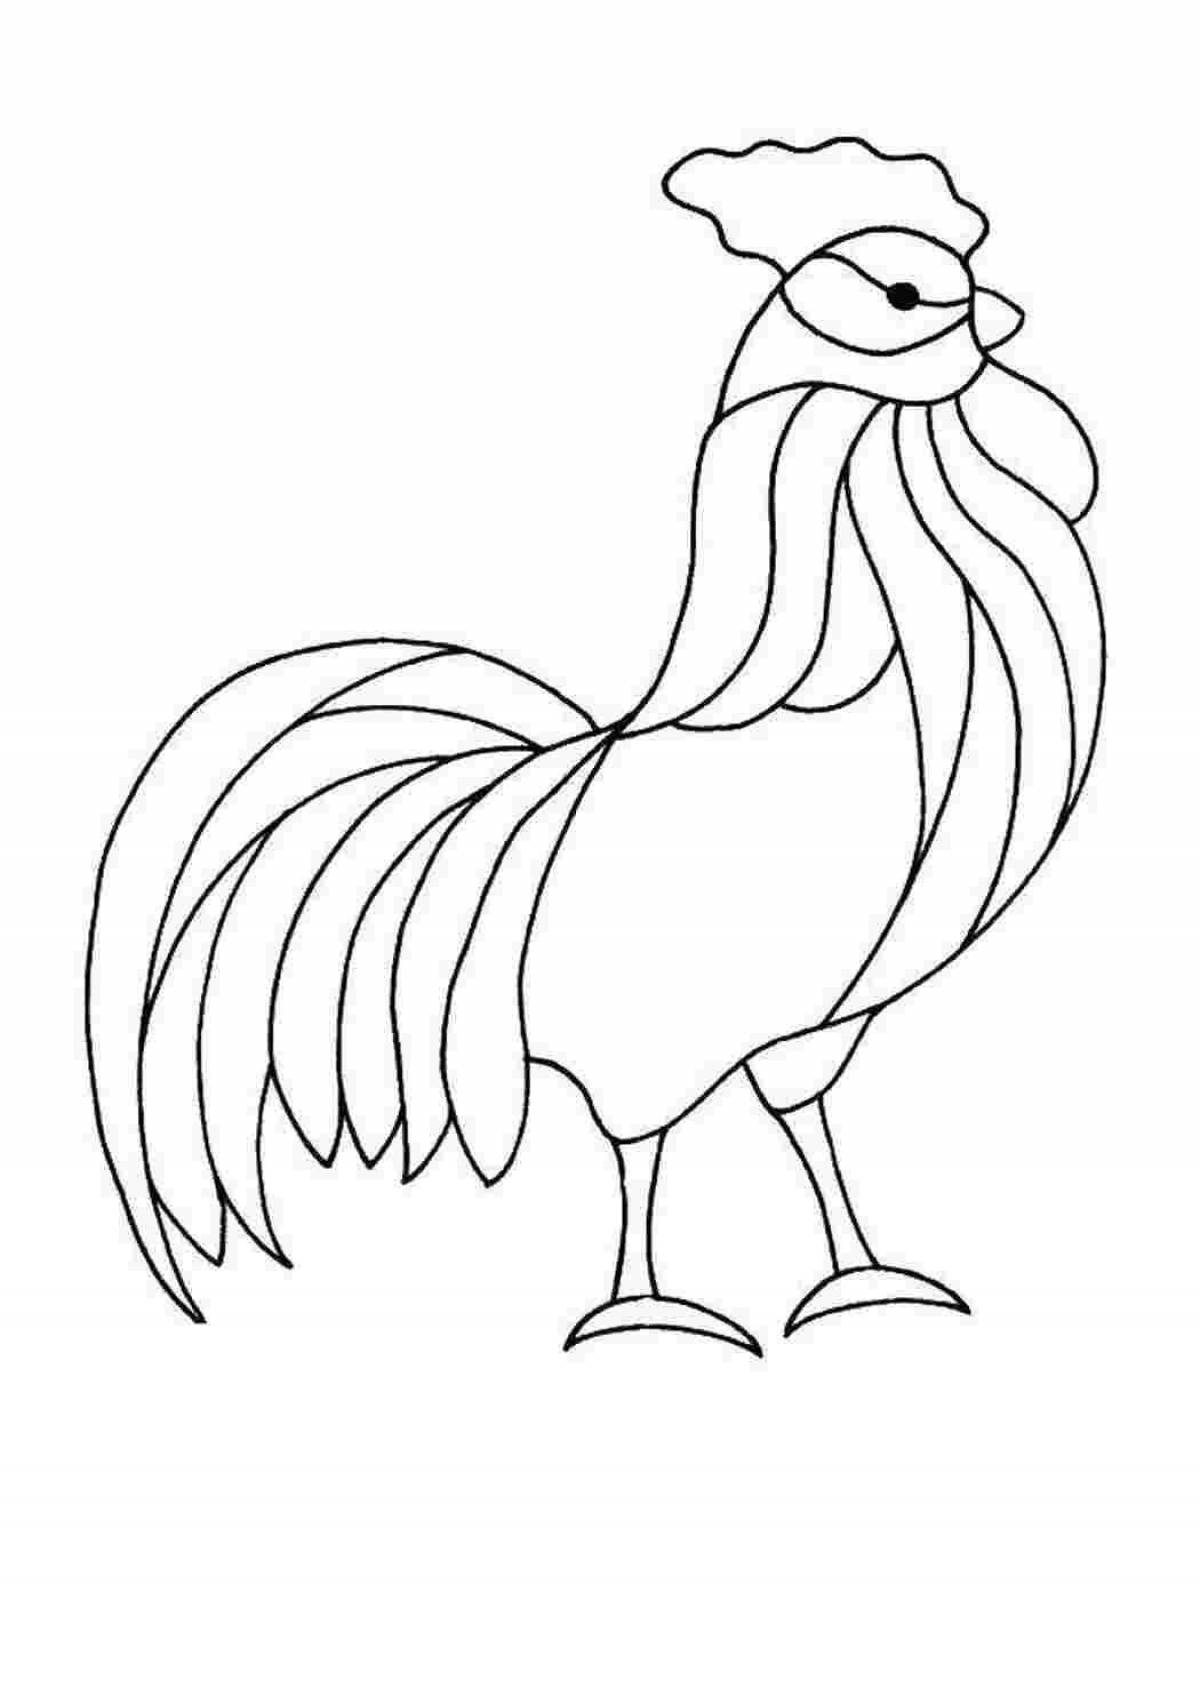 Coloring page of an attractive rooster